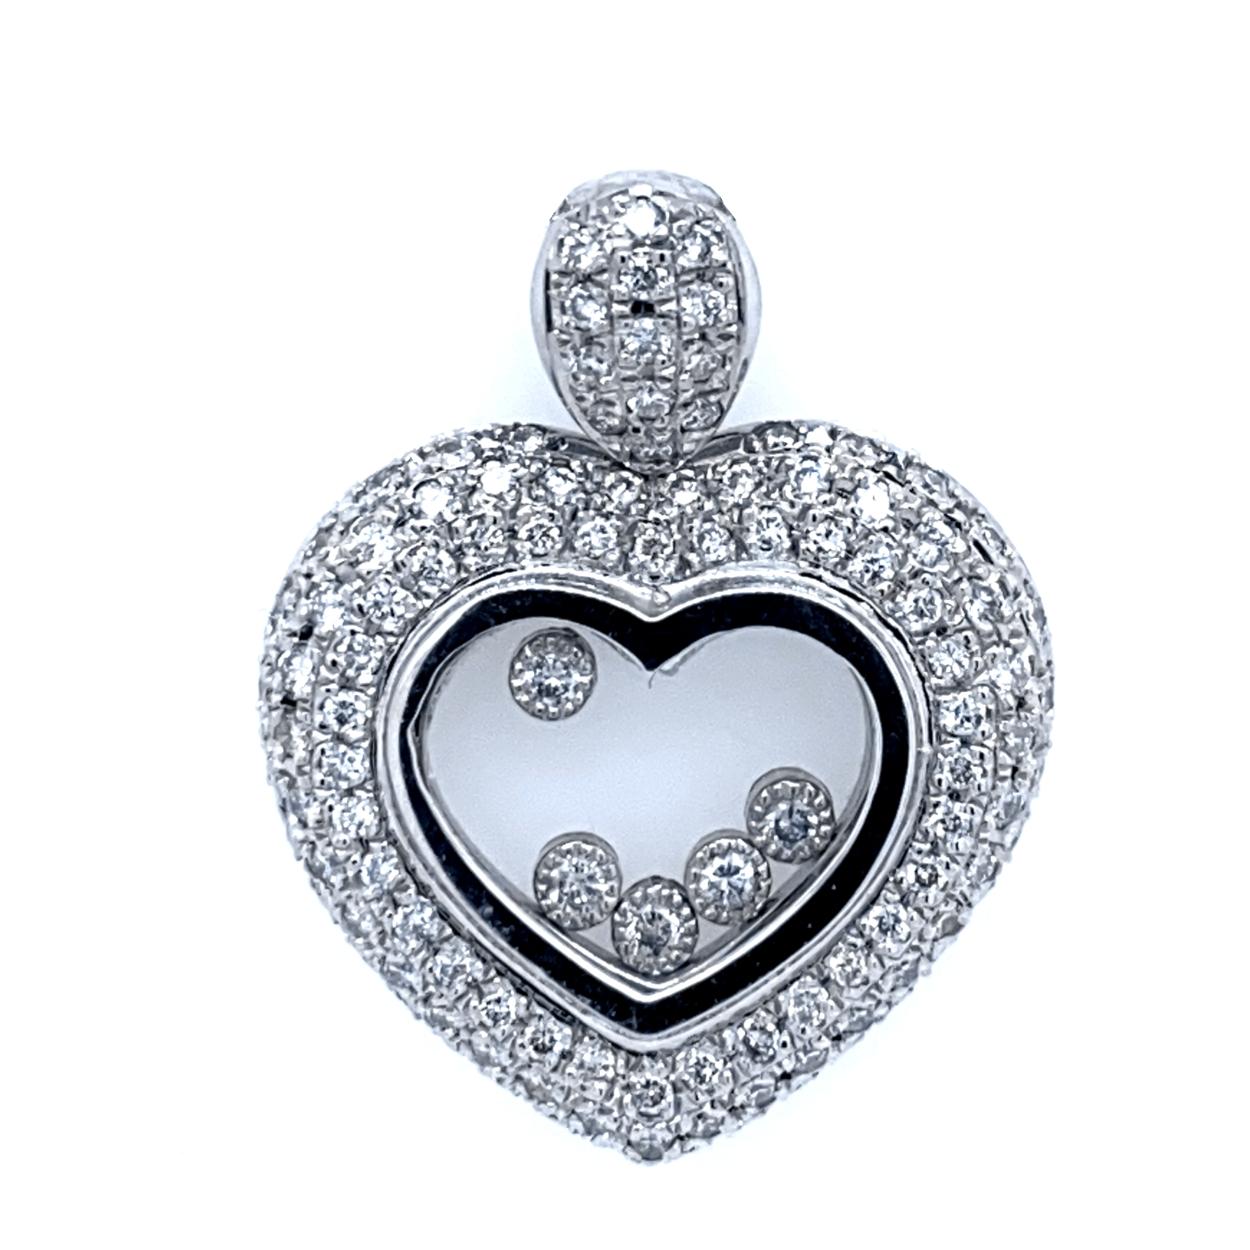 14K Gold Pave Set Diamond Heart Shape Pendant  with 5 diamonds under the glass. 
Total Diamond Weight: 1.14 Ct
Total Necklace Weight: 8.4 gr 14K White Gold
Pendant Size 29x24 mm 
Chain Not included